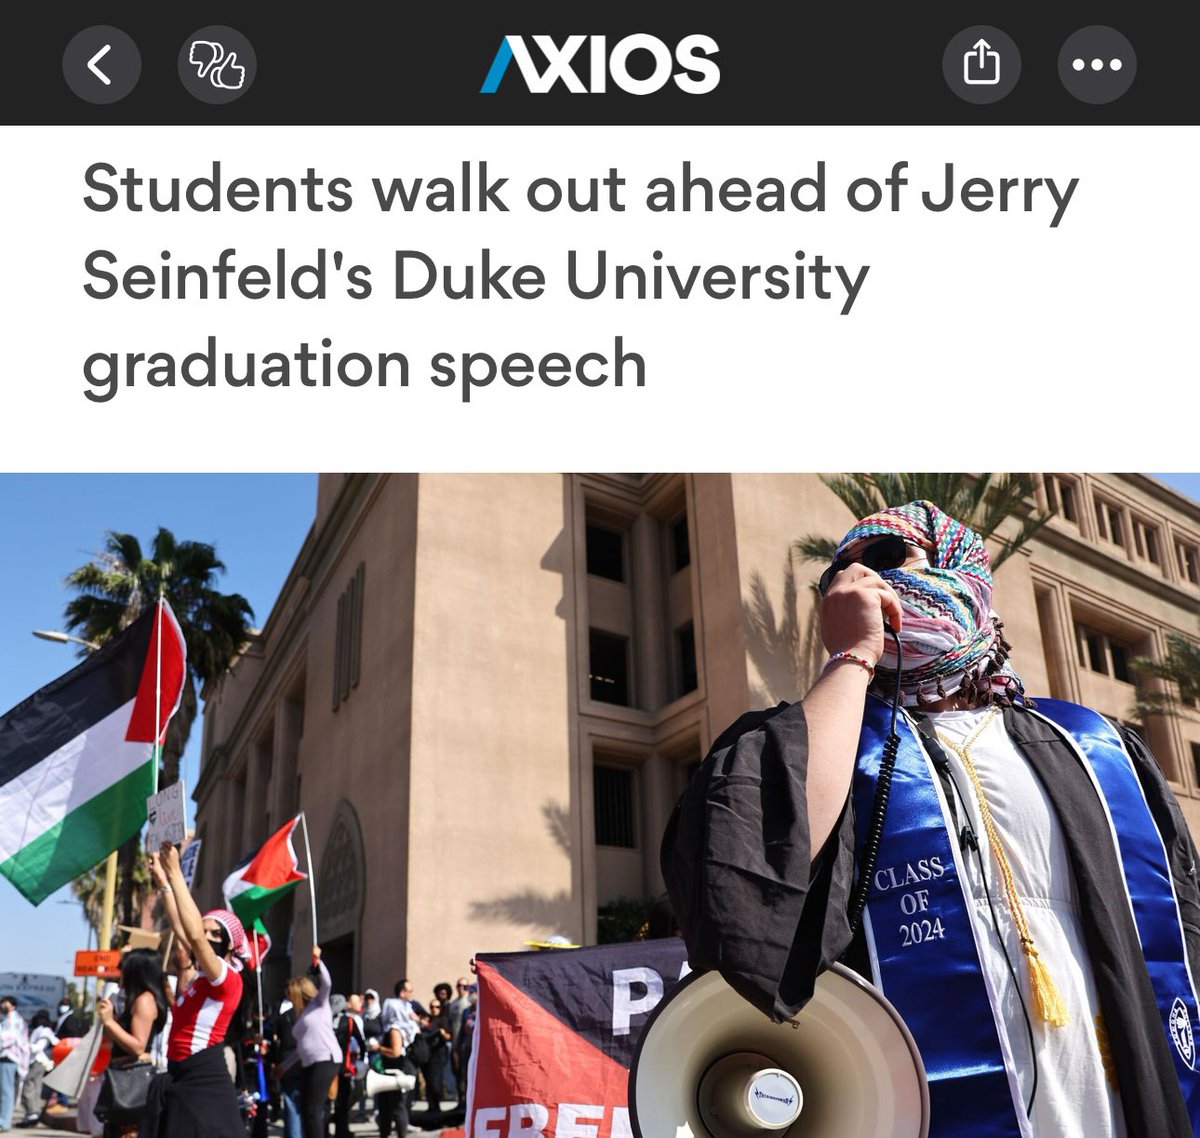 30 out of 7,000 students walked out. That’s 0.0043%. Why does the media habitually platform this fringe? Guaranteed coverage is the nicotine to the pup tent campus intifada and Hamas salutes them all.